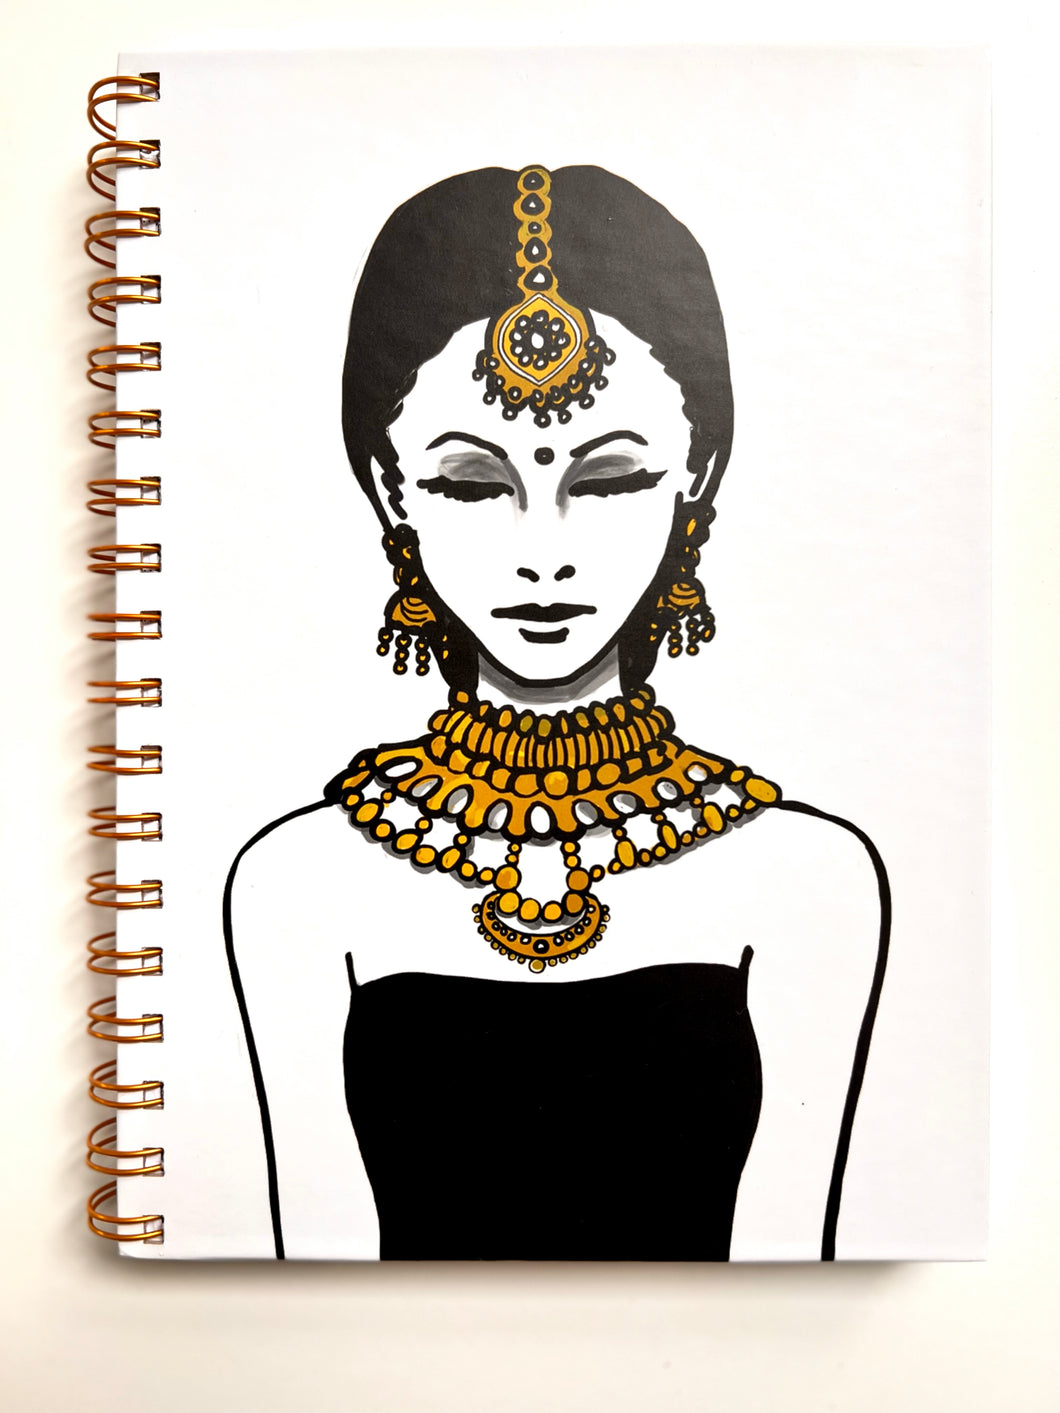 Hardbound Sprial Notebook - Neha- Indian / South Asian woman in heavy jewelry